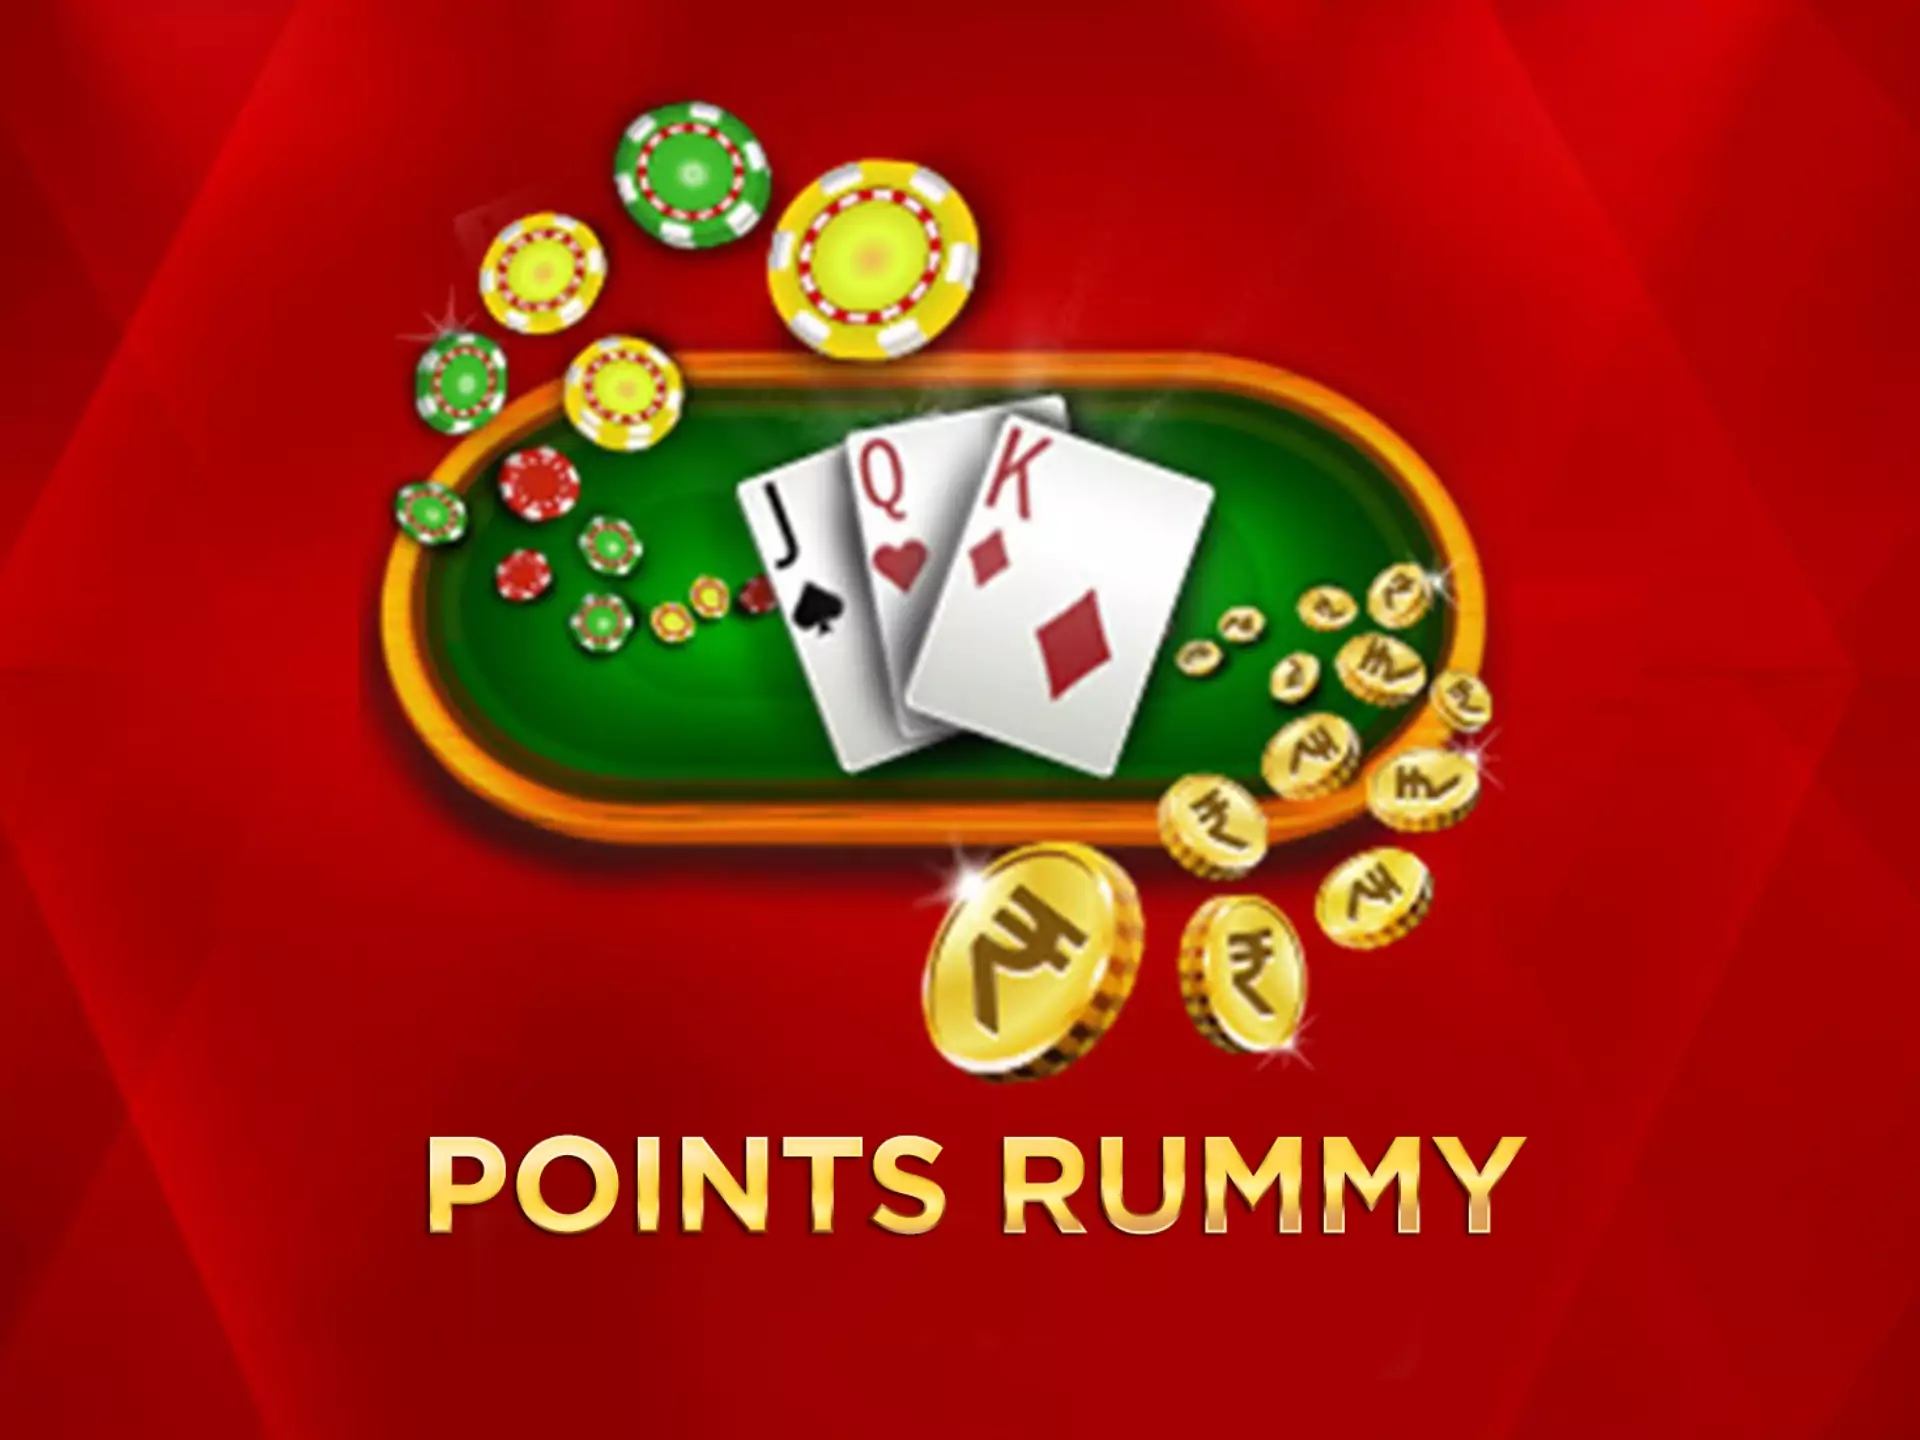 Register at an online casino and play Points Rummy in India.